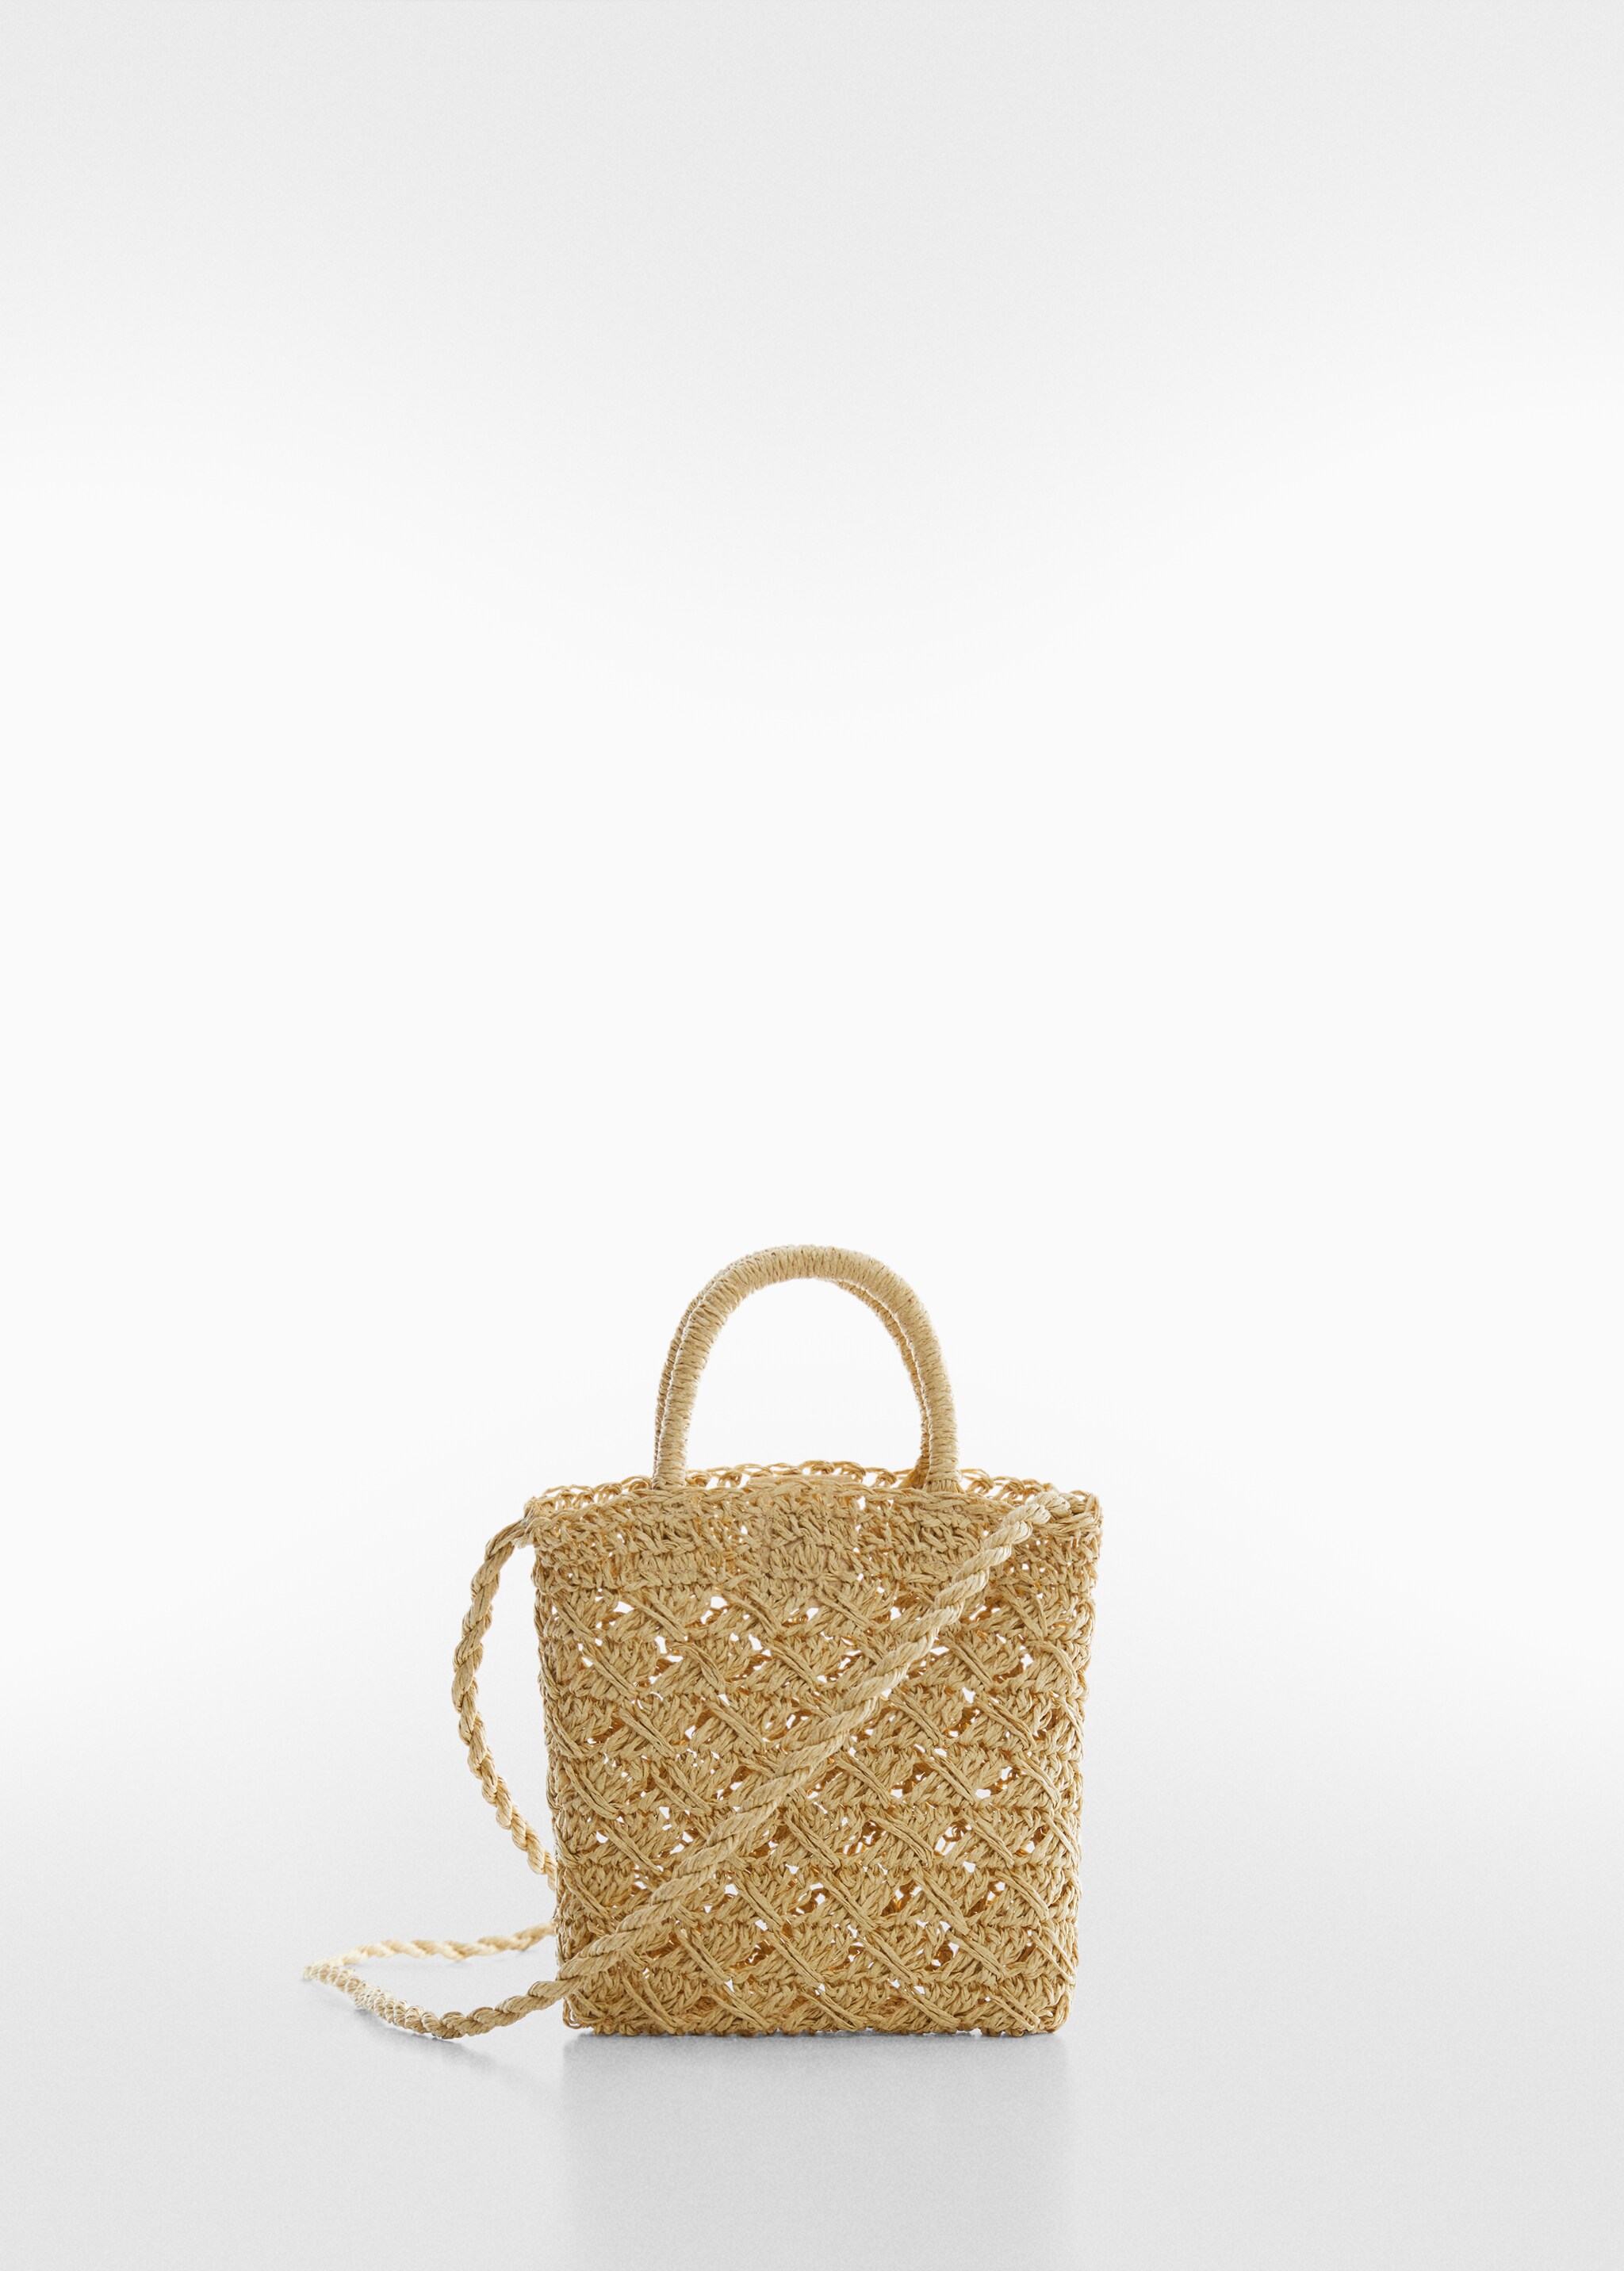 Mini straw bag - Article without model